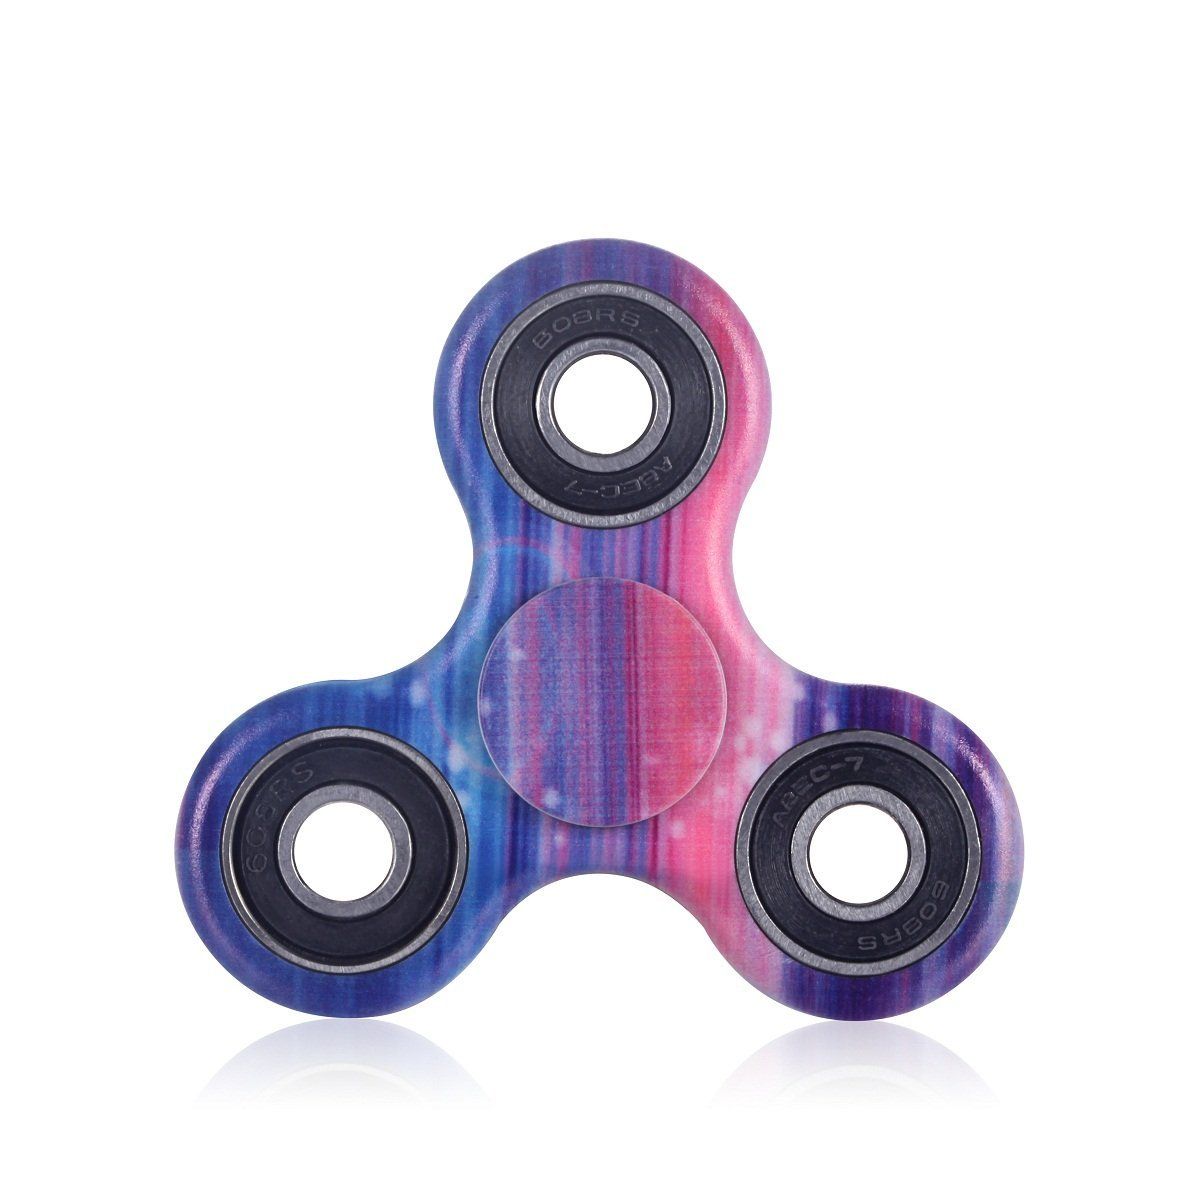 MerryXD Fidget Hand Spinner Toy Blue and Pink Premium Bearing High Speed Perfect For ADD, ADHD, Anxiety, and Autism Adult Children